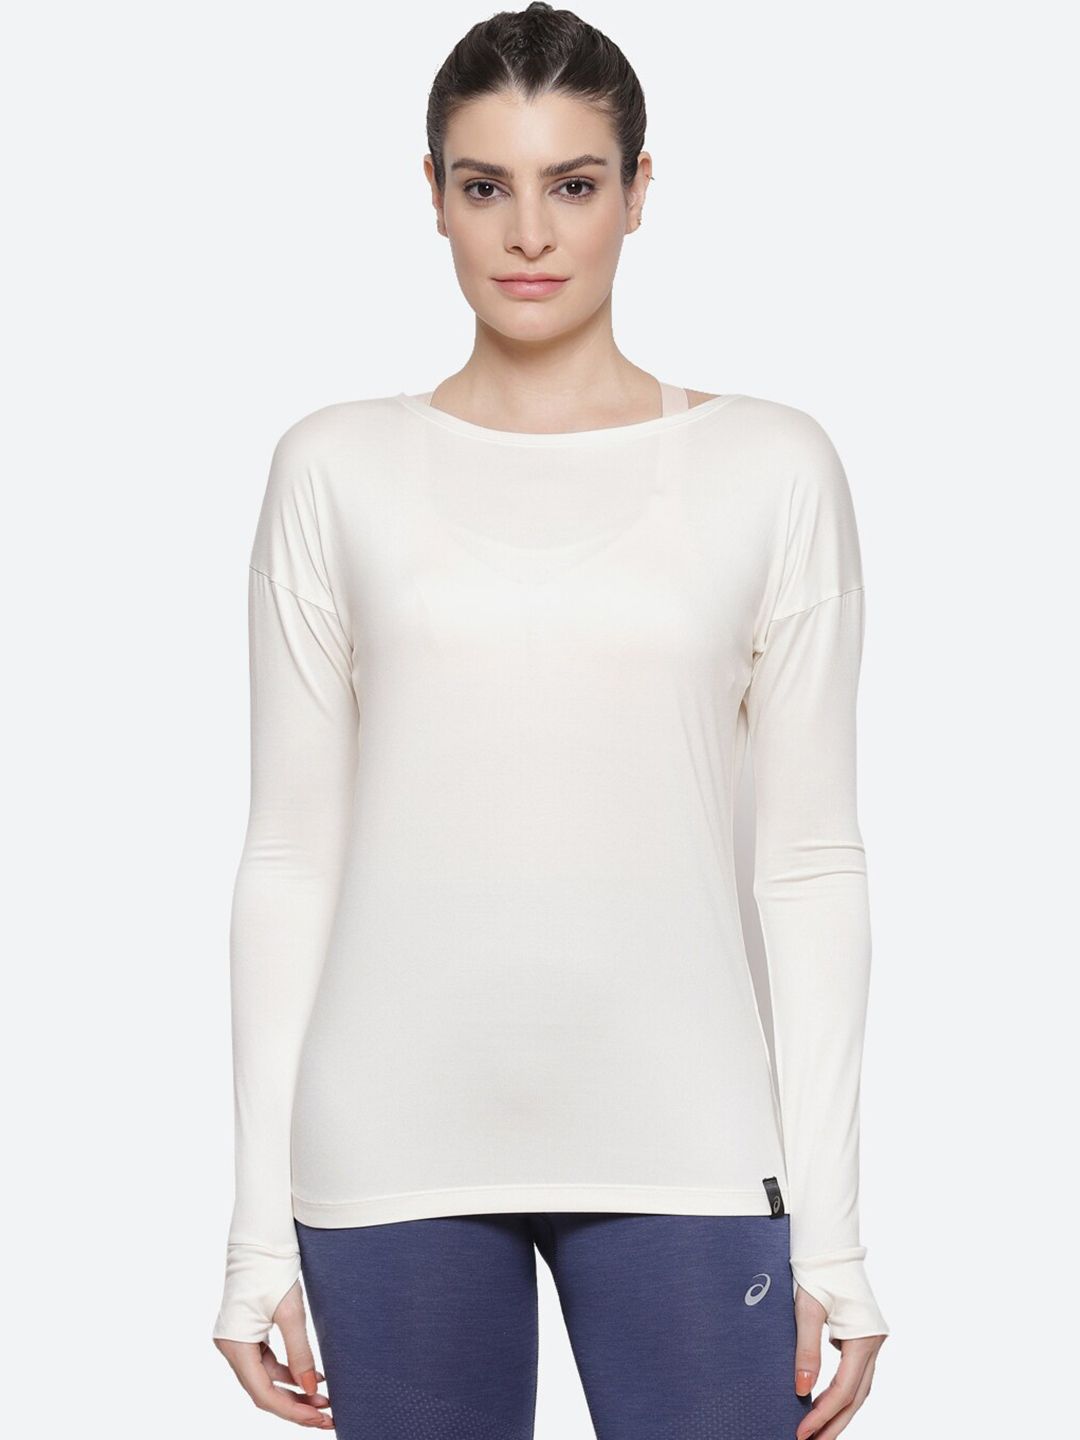 ASICS Women Off White Drop-Shoulder Sleeves W LS Training T-shirt Price in India